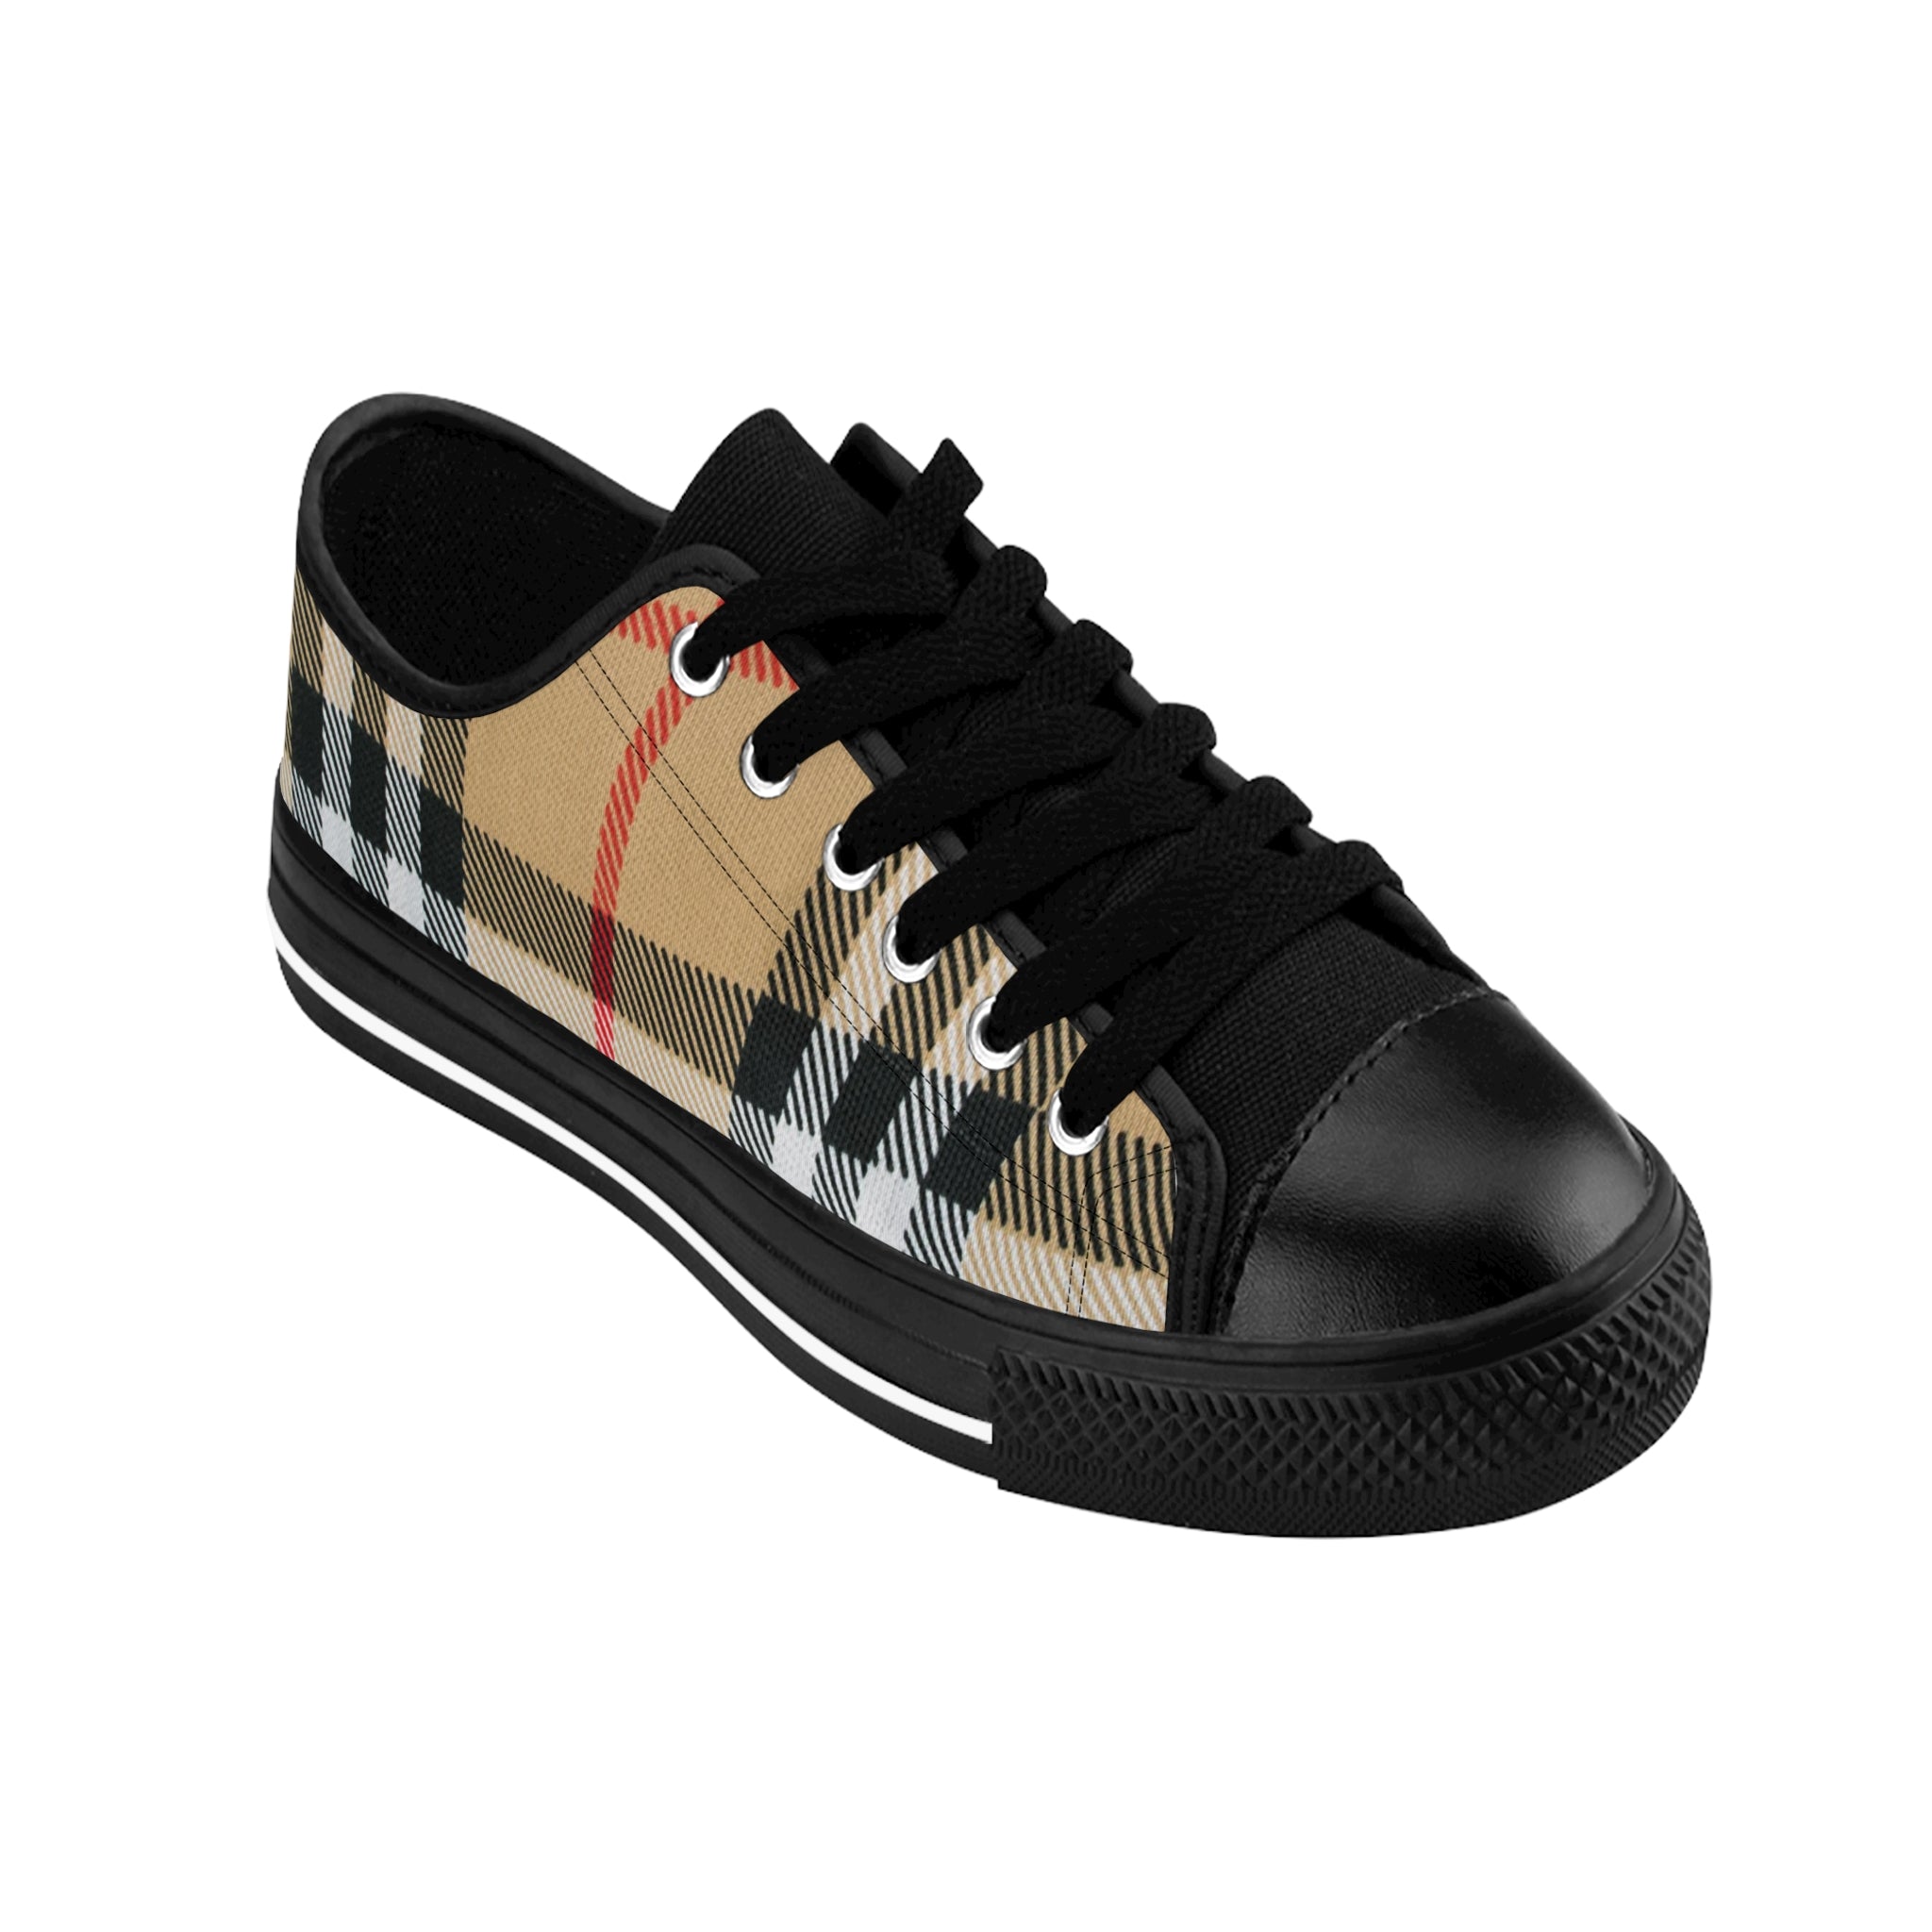 Groove Fashion Collection in Dark Plaid Men's Low Top Canvas Shoes, Men's Casual Shoes